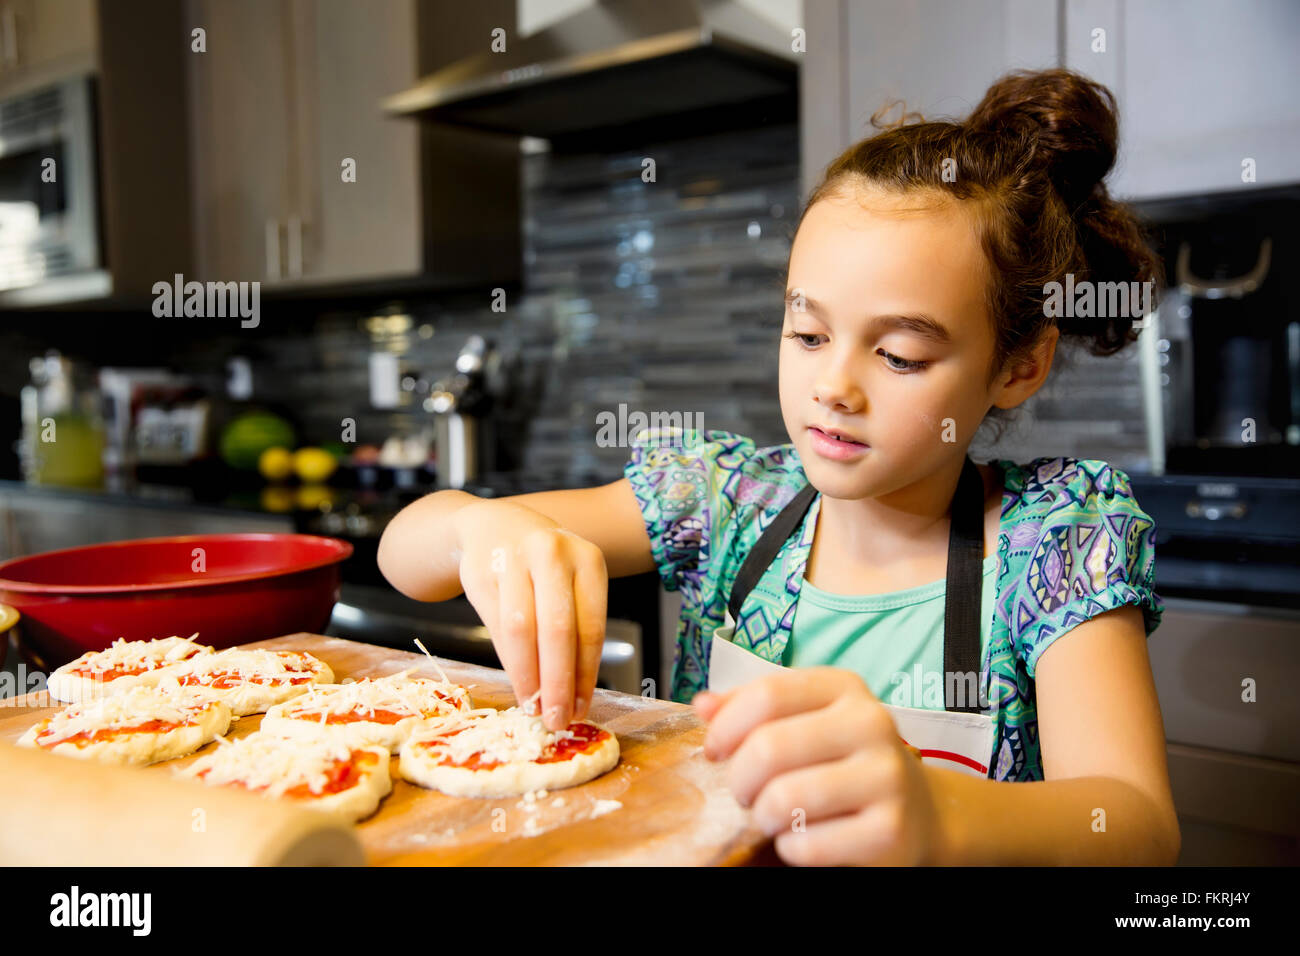 Mixed Race girl cooking in kitchen Banque D'Images